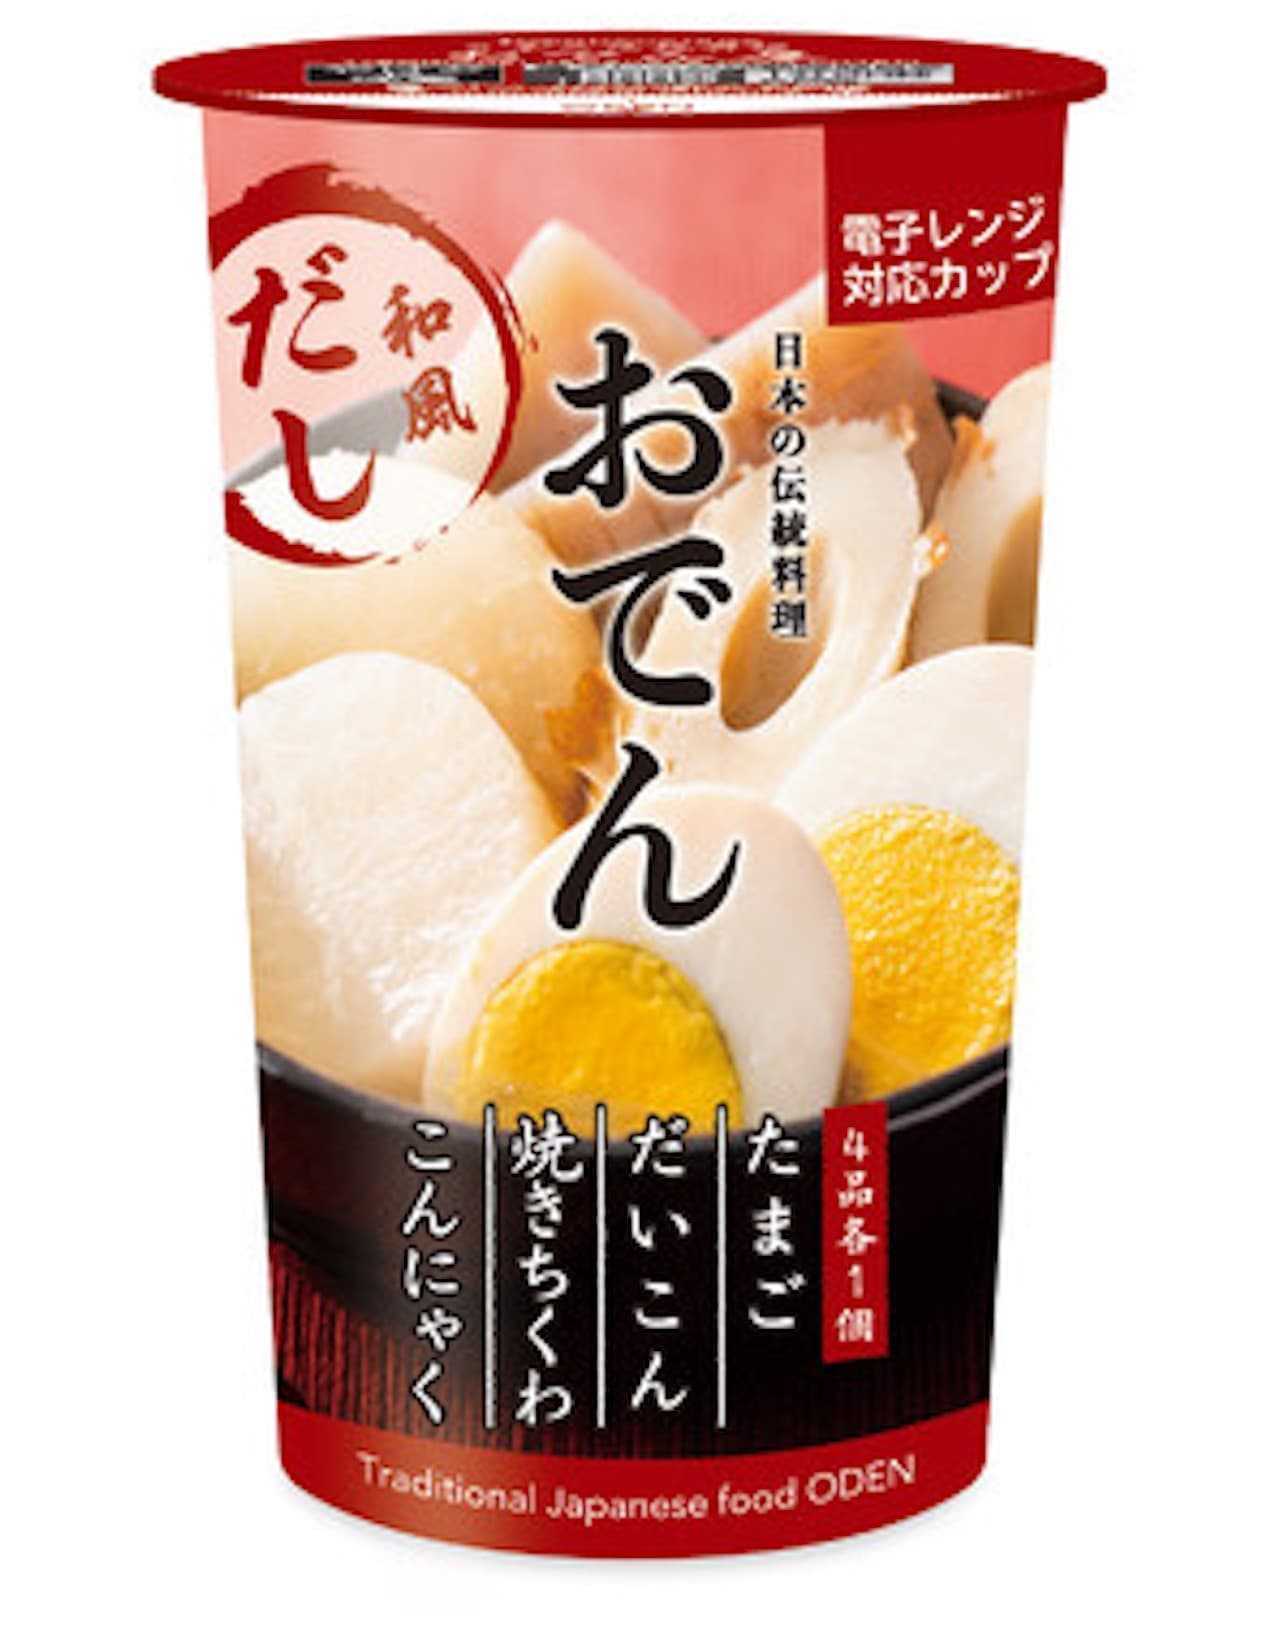 Cup oden that does not require a plate "Oden Japanese style"